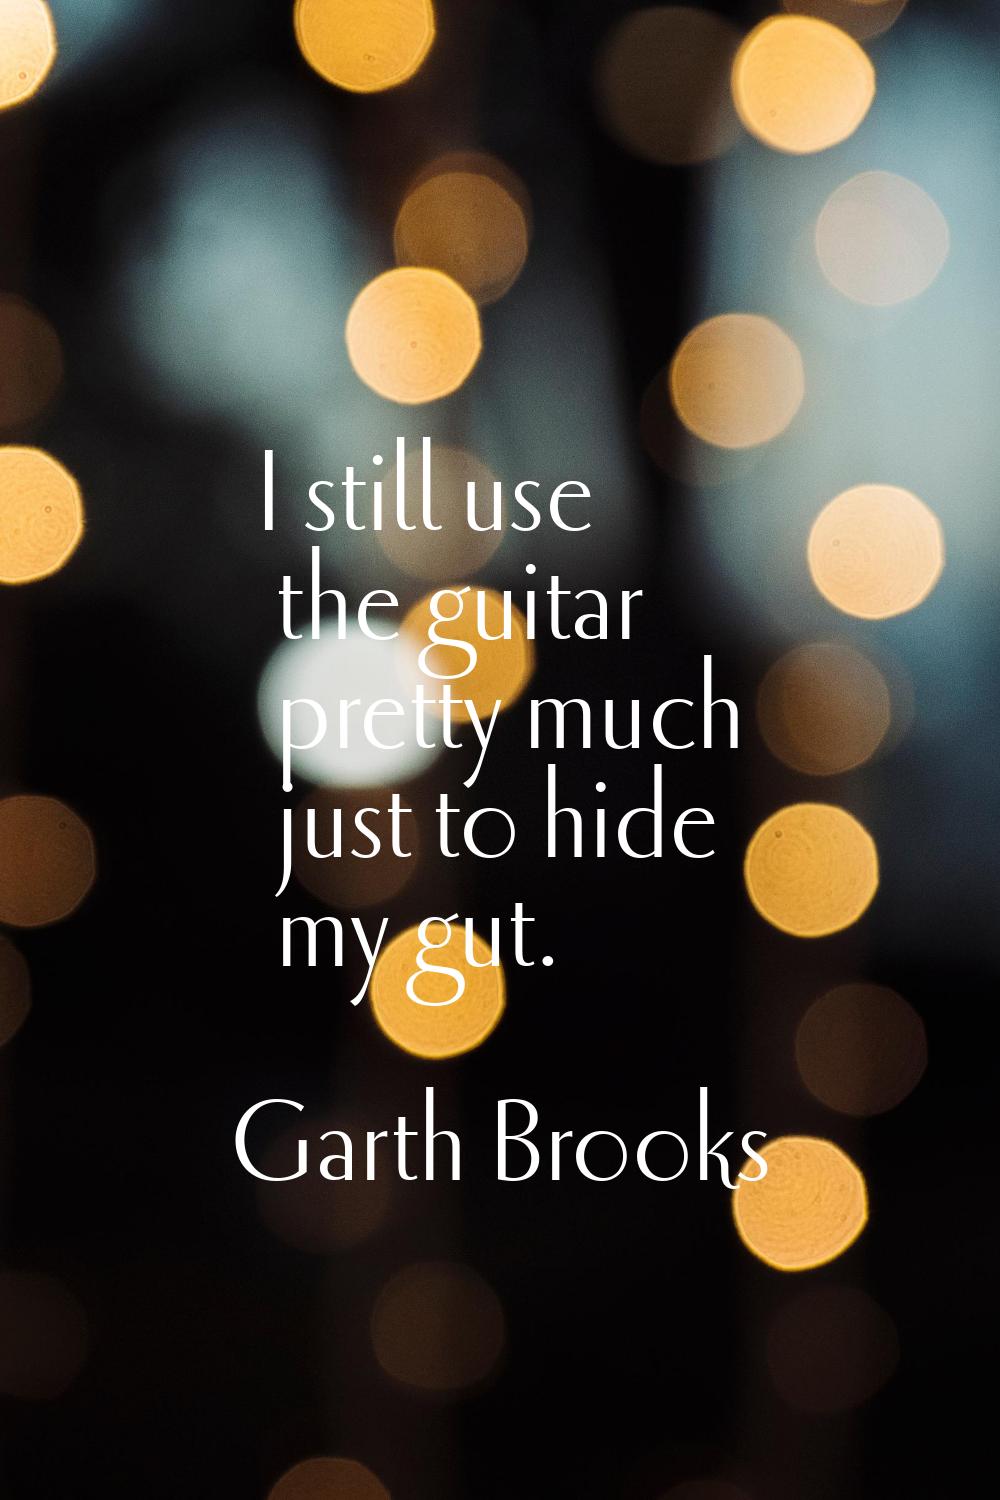 I still use the guitar pretty much just to hide my gut.